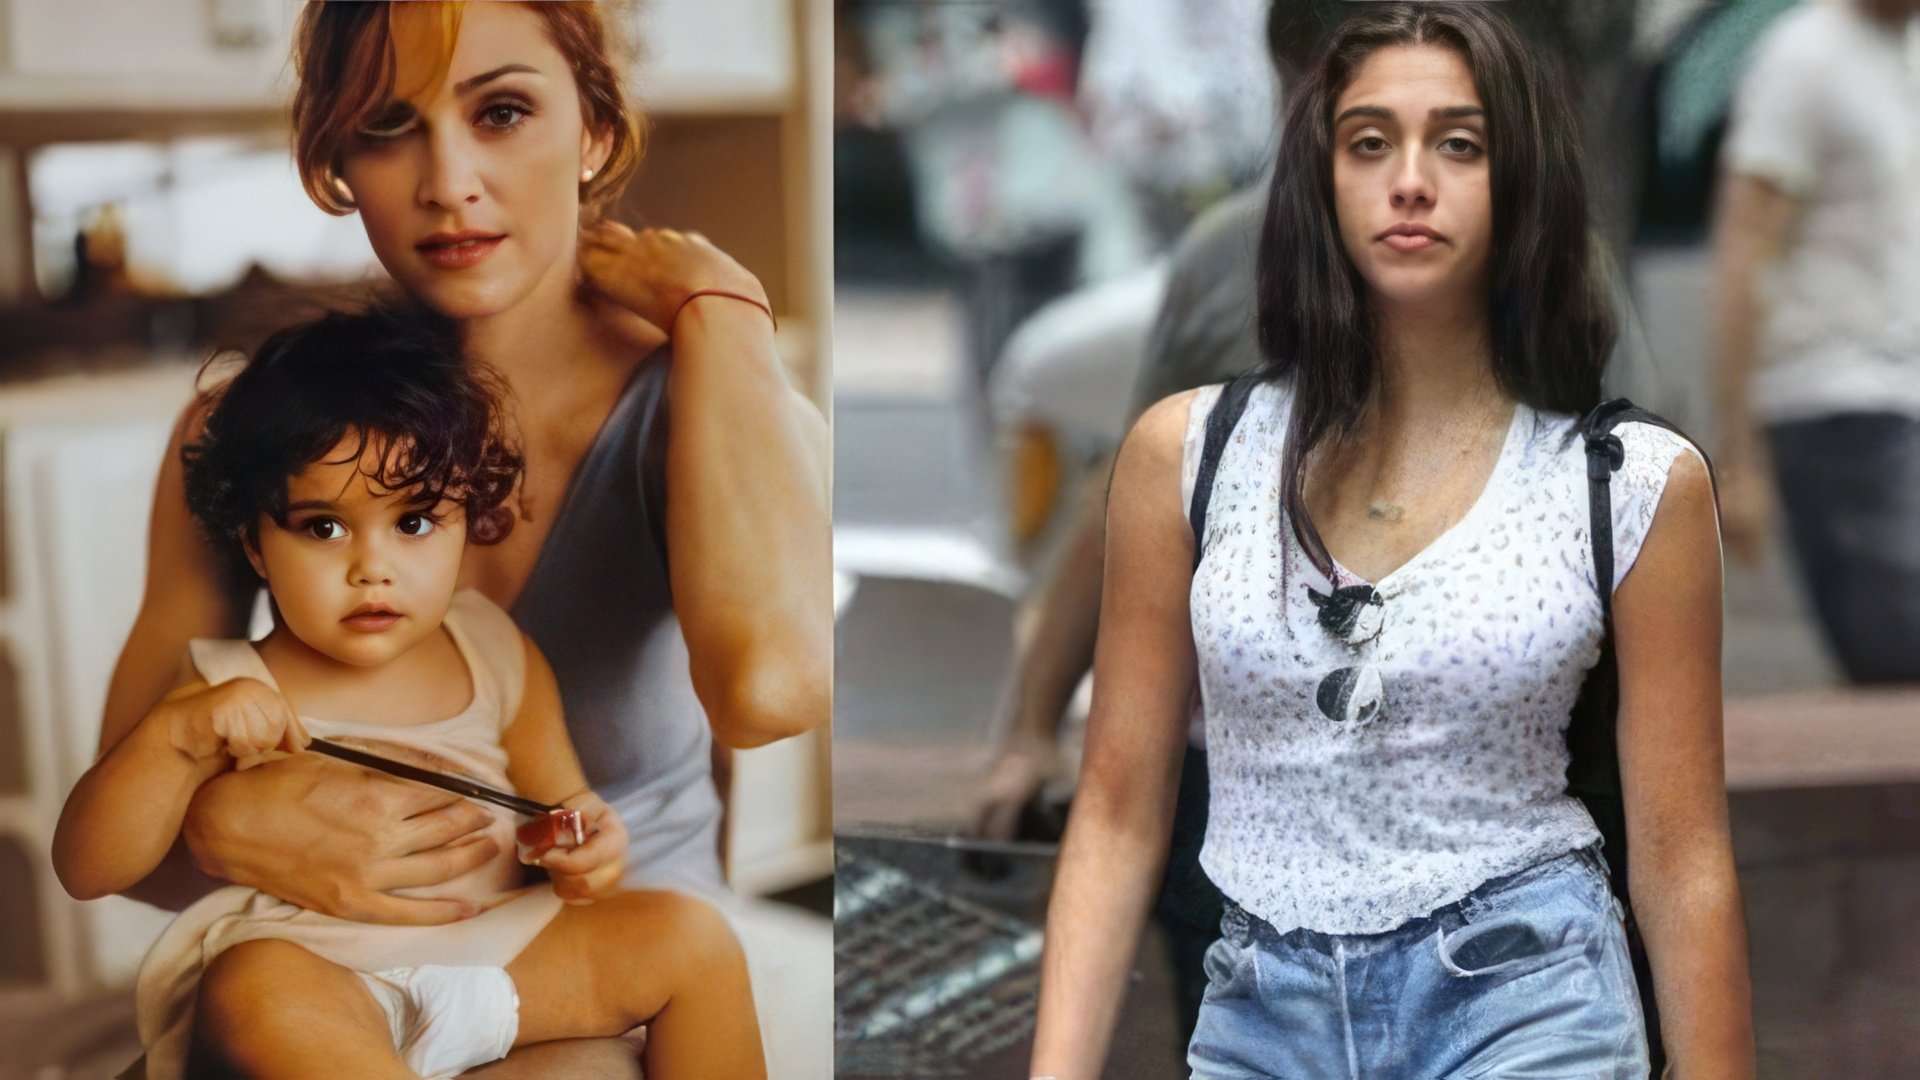 Lourdes Ciccone: in childhood and 20 years later